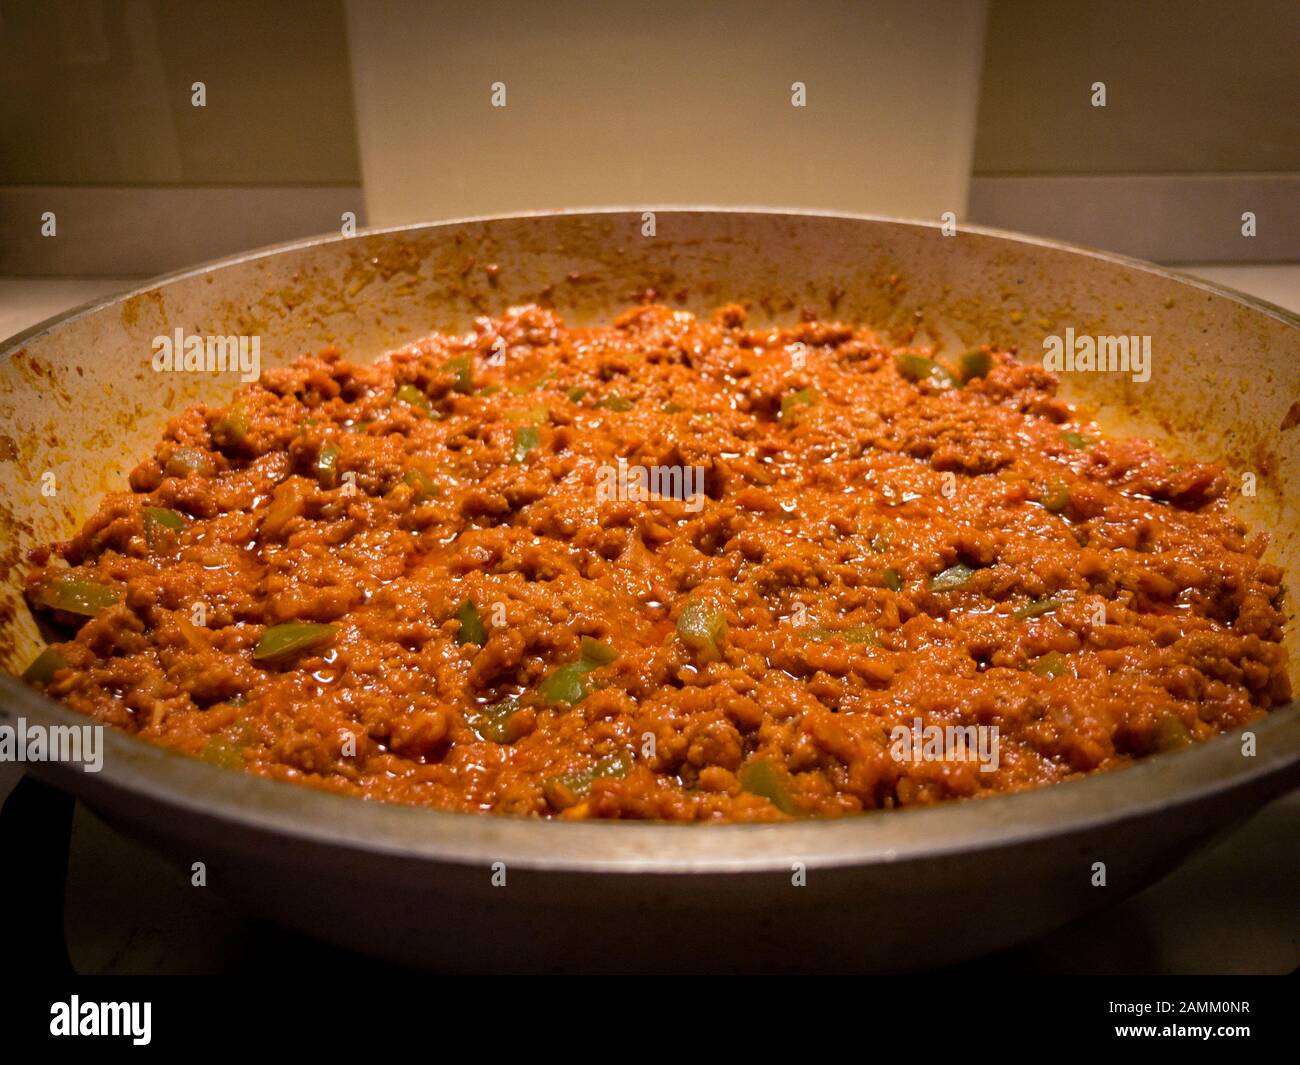 Homemade Spaghetti Sauce In A Frying Pan It S Composed Of Minced Meat Crushed Tomatoes And Green Pepper It S The Main Part Of Spaghetti Bolognese Stock Photo Alamy